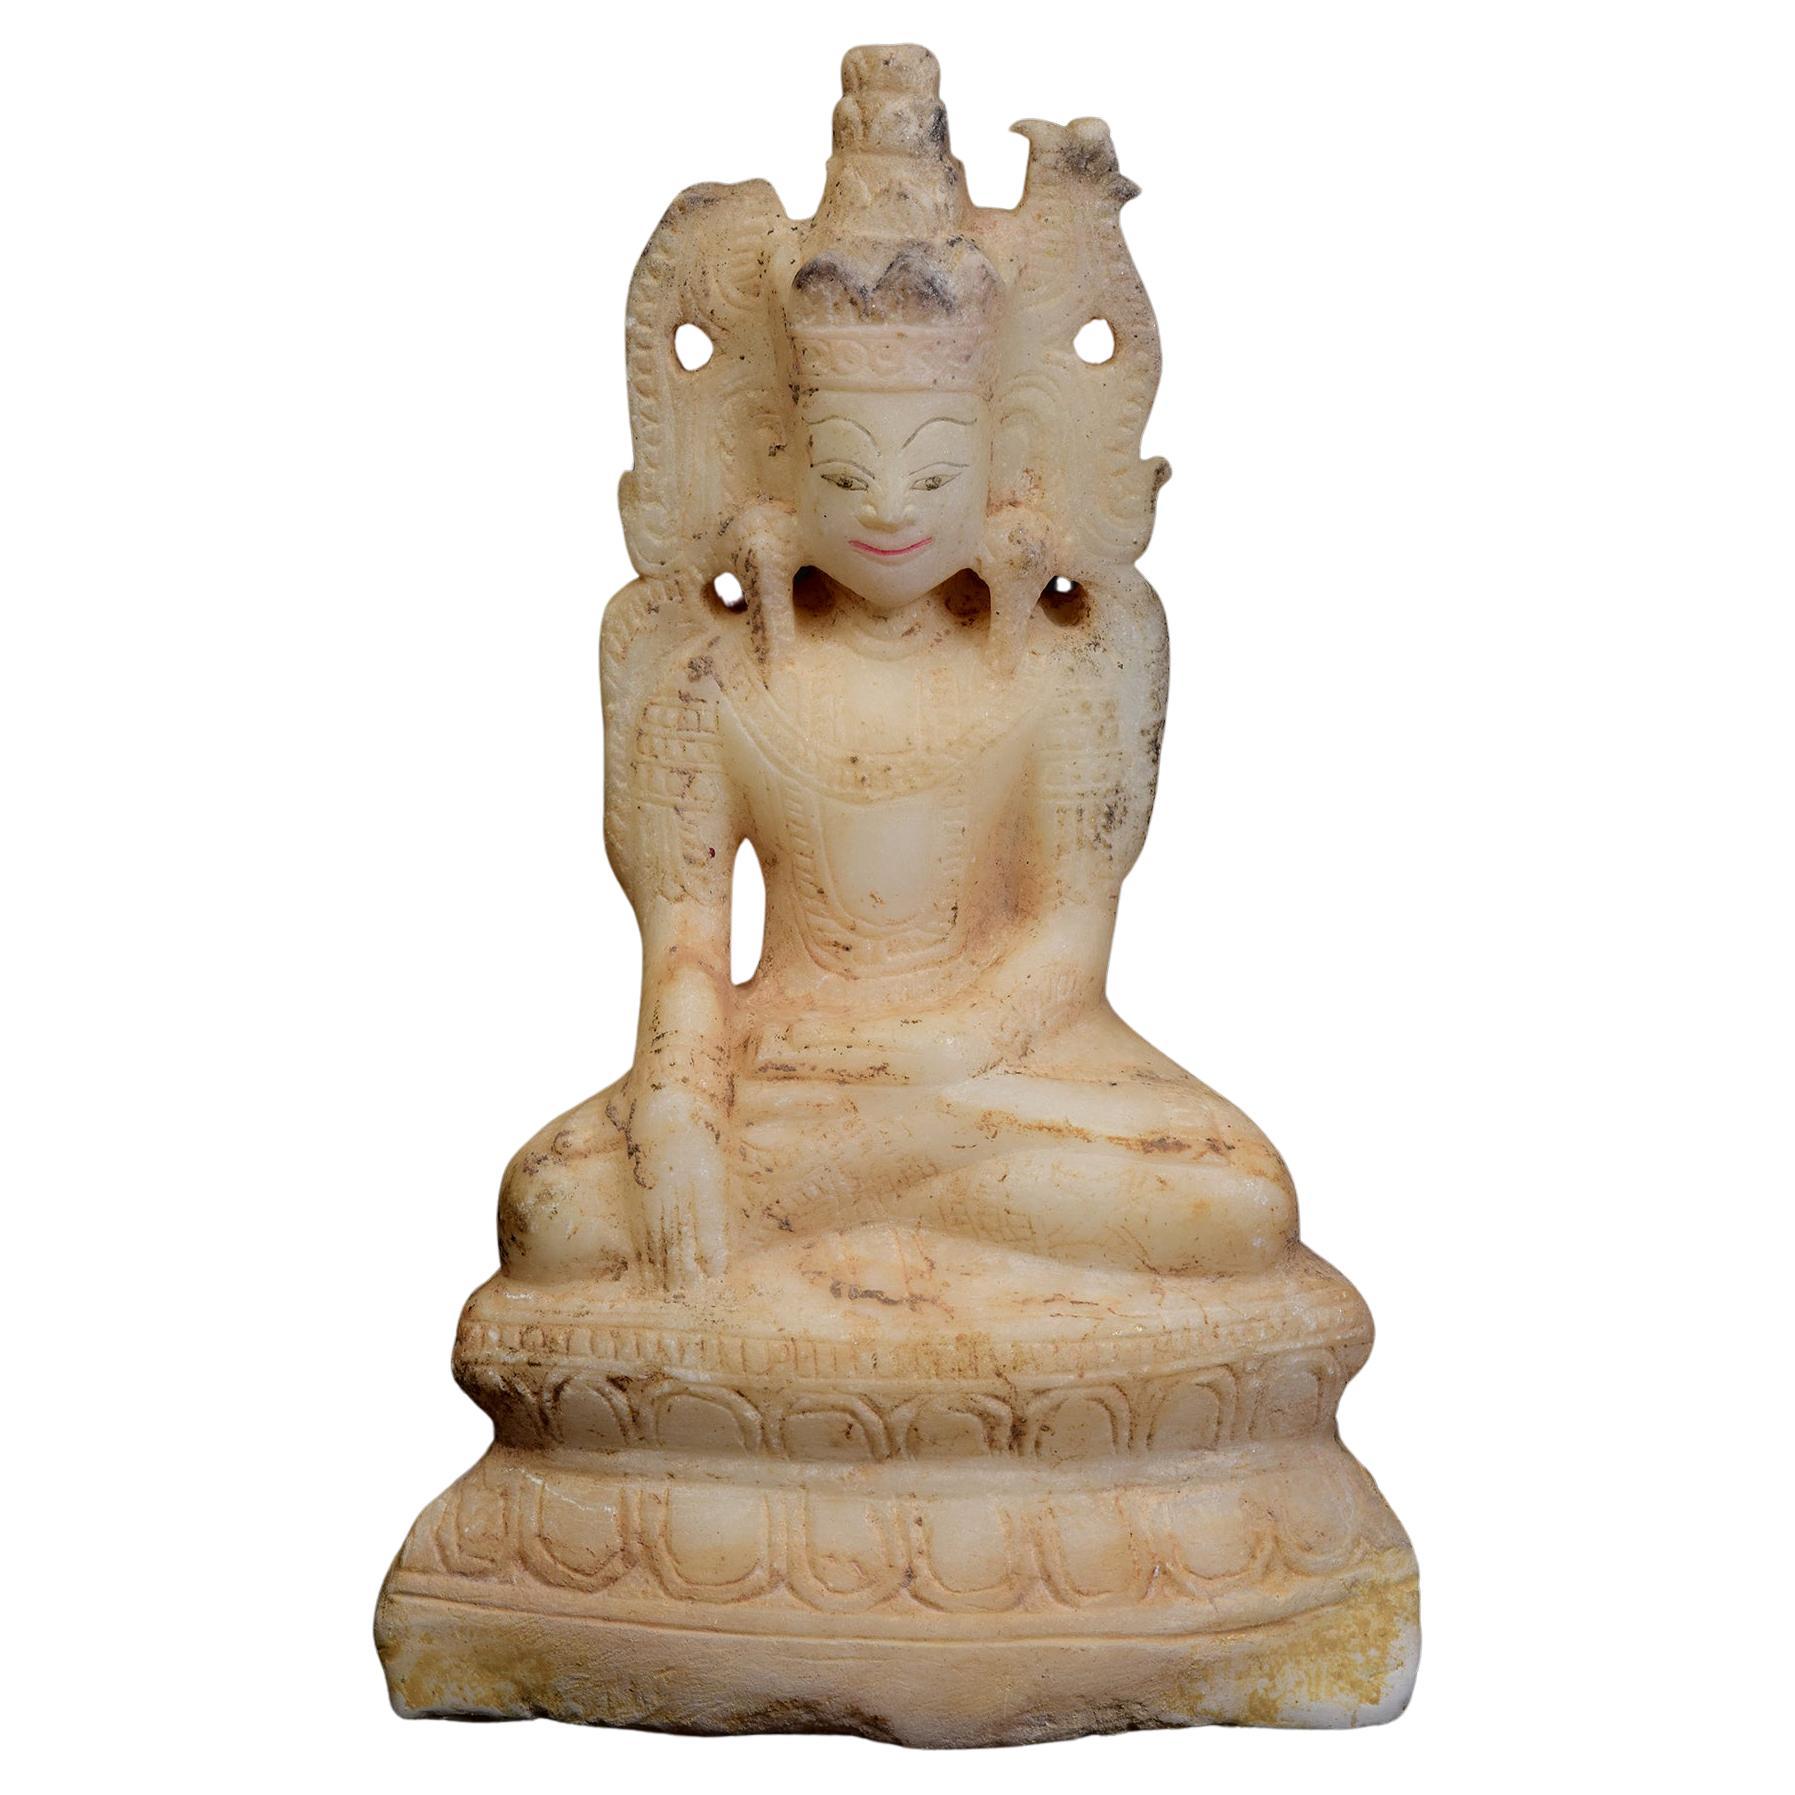 18th C., Shan, Rare Antique Burmese Alabaster Marble Seated King Buddha Statue For Sale